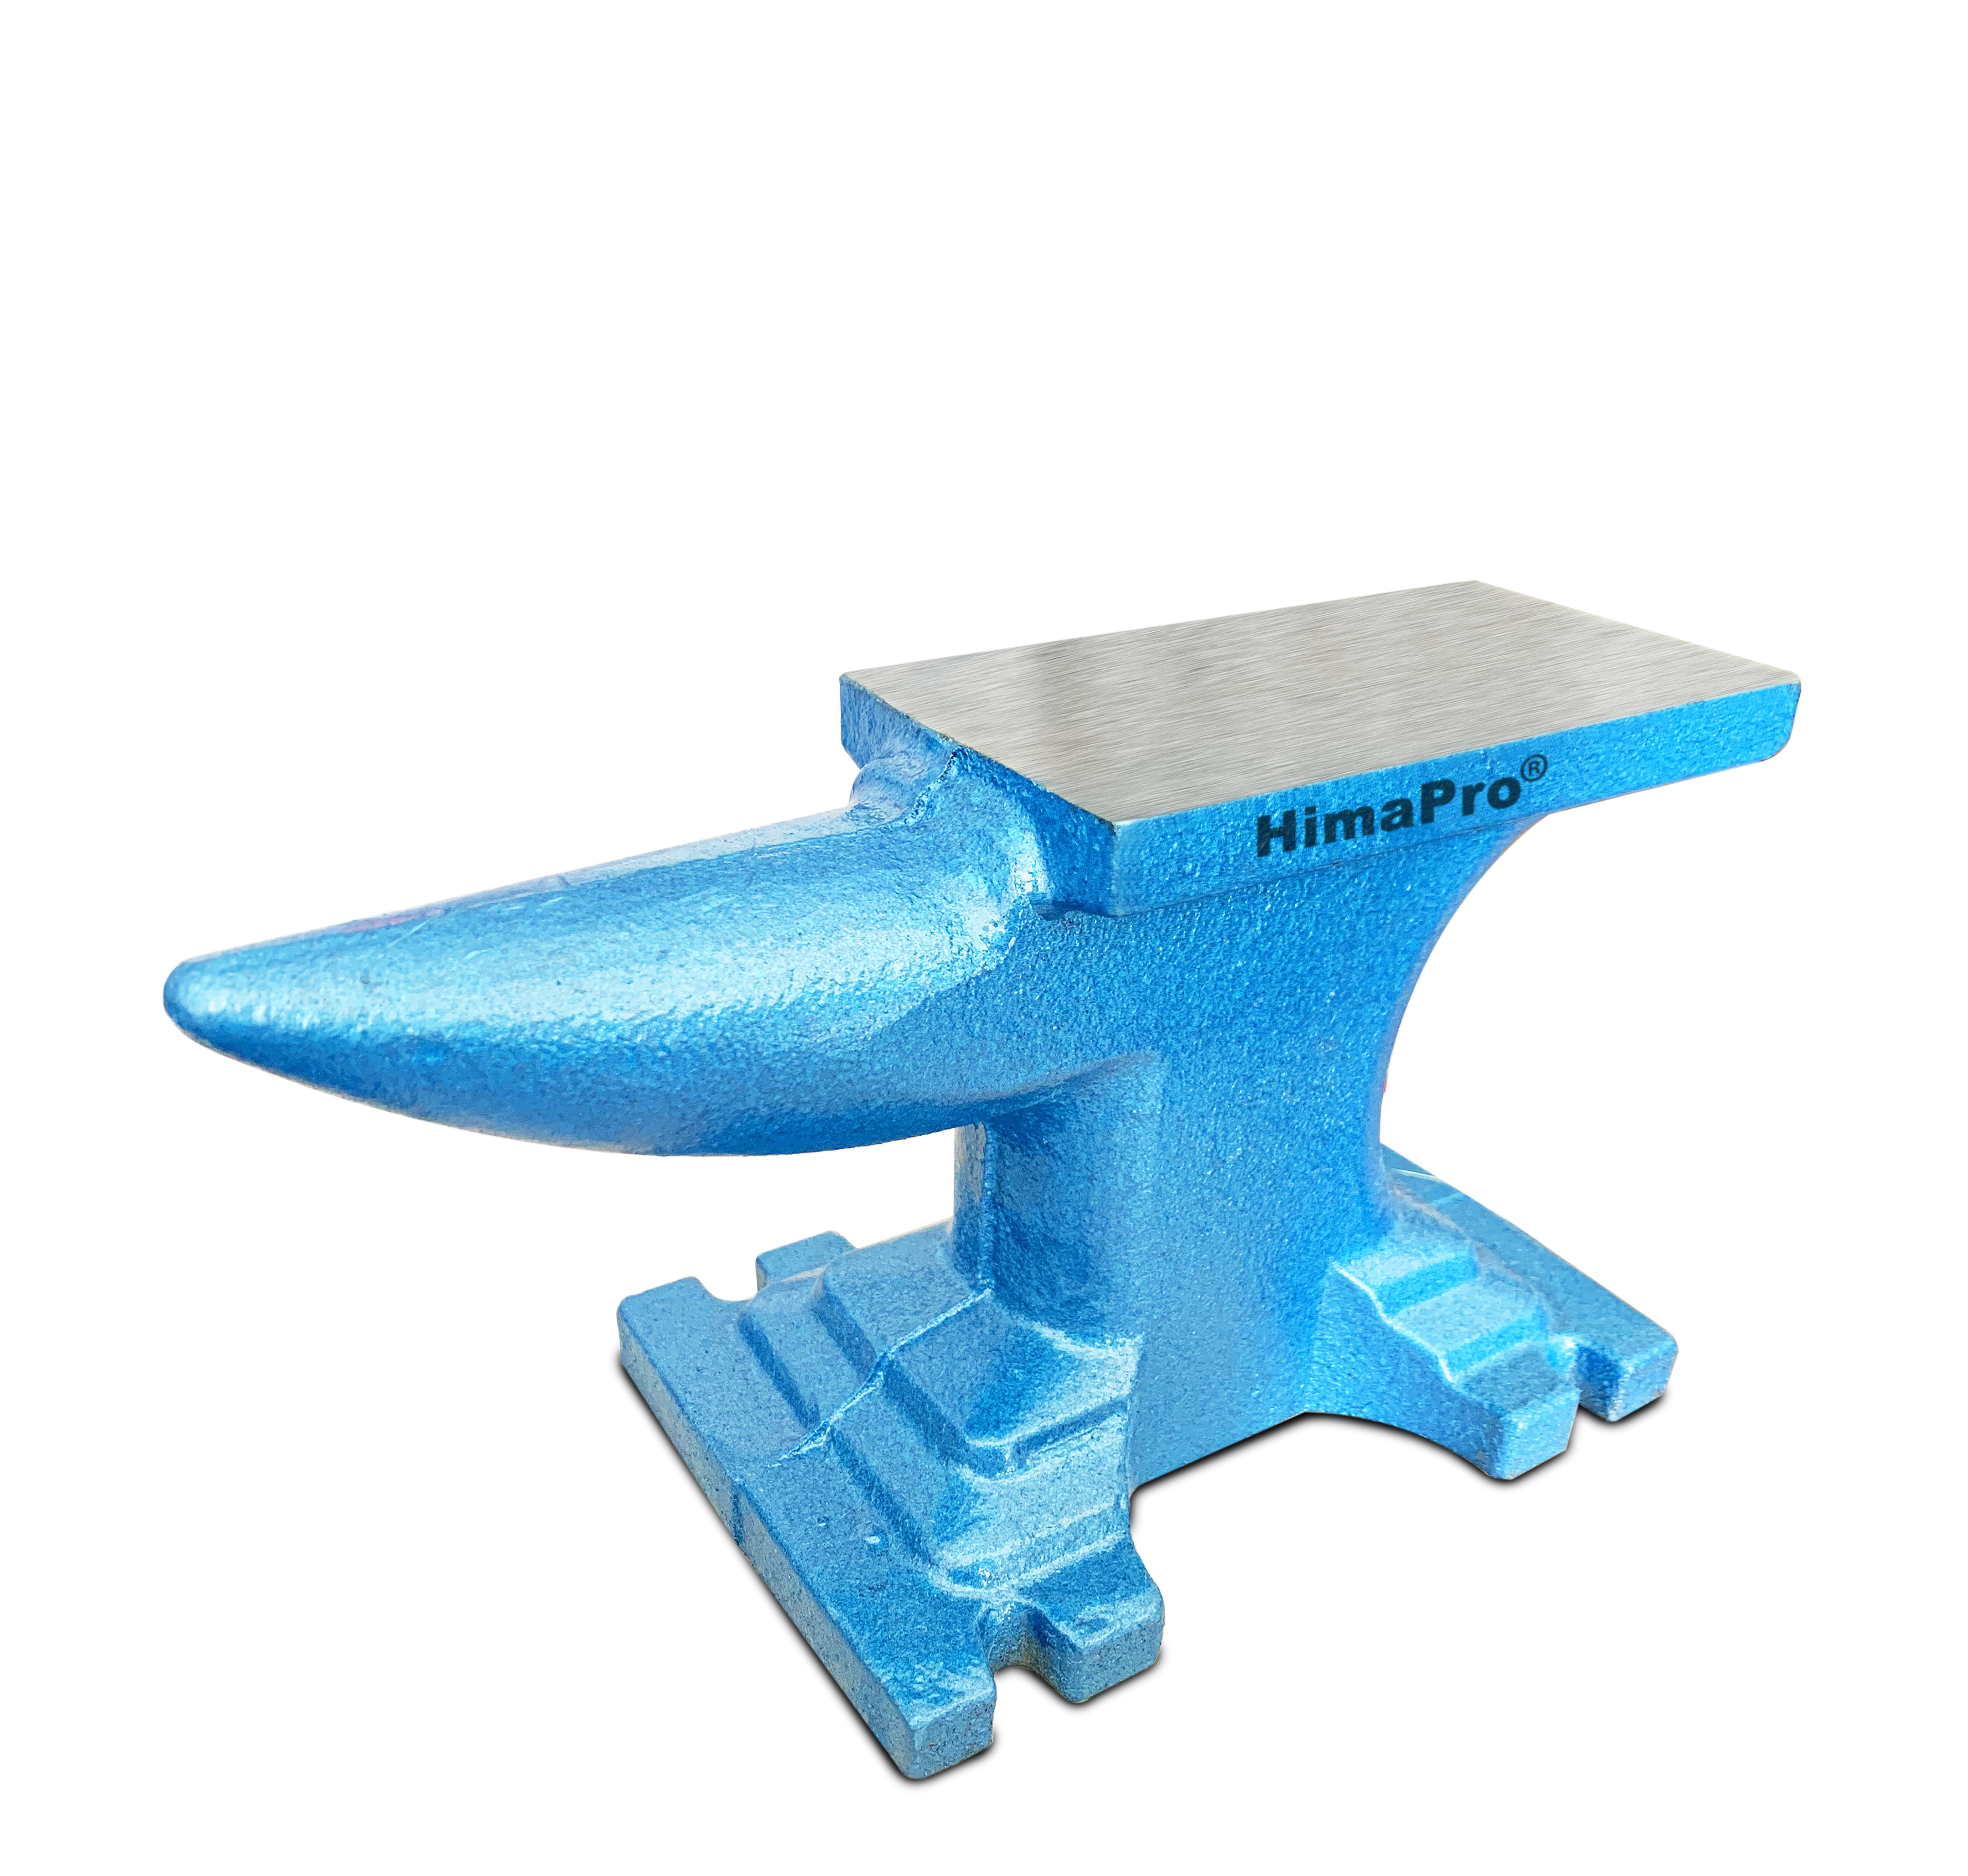 Tsurpcao tsurpcao iron anvil,iron horn anvil bench block for jewelry making  forge tools equipment (1.2 lb, blue)